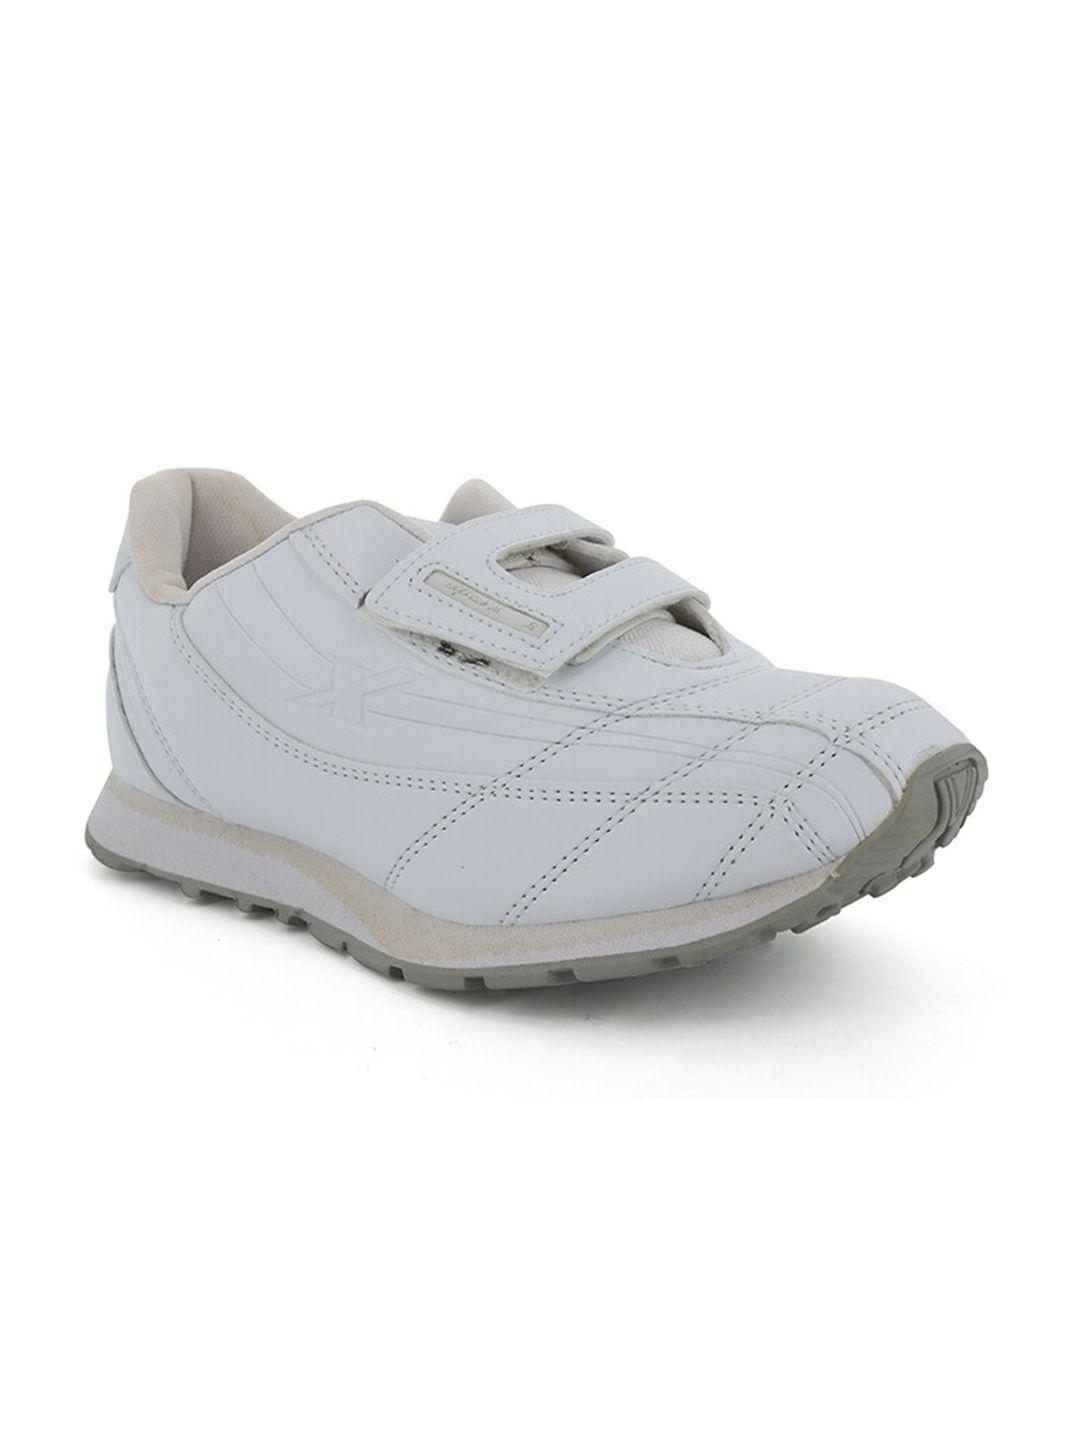 sparx boys white running shoes